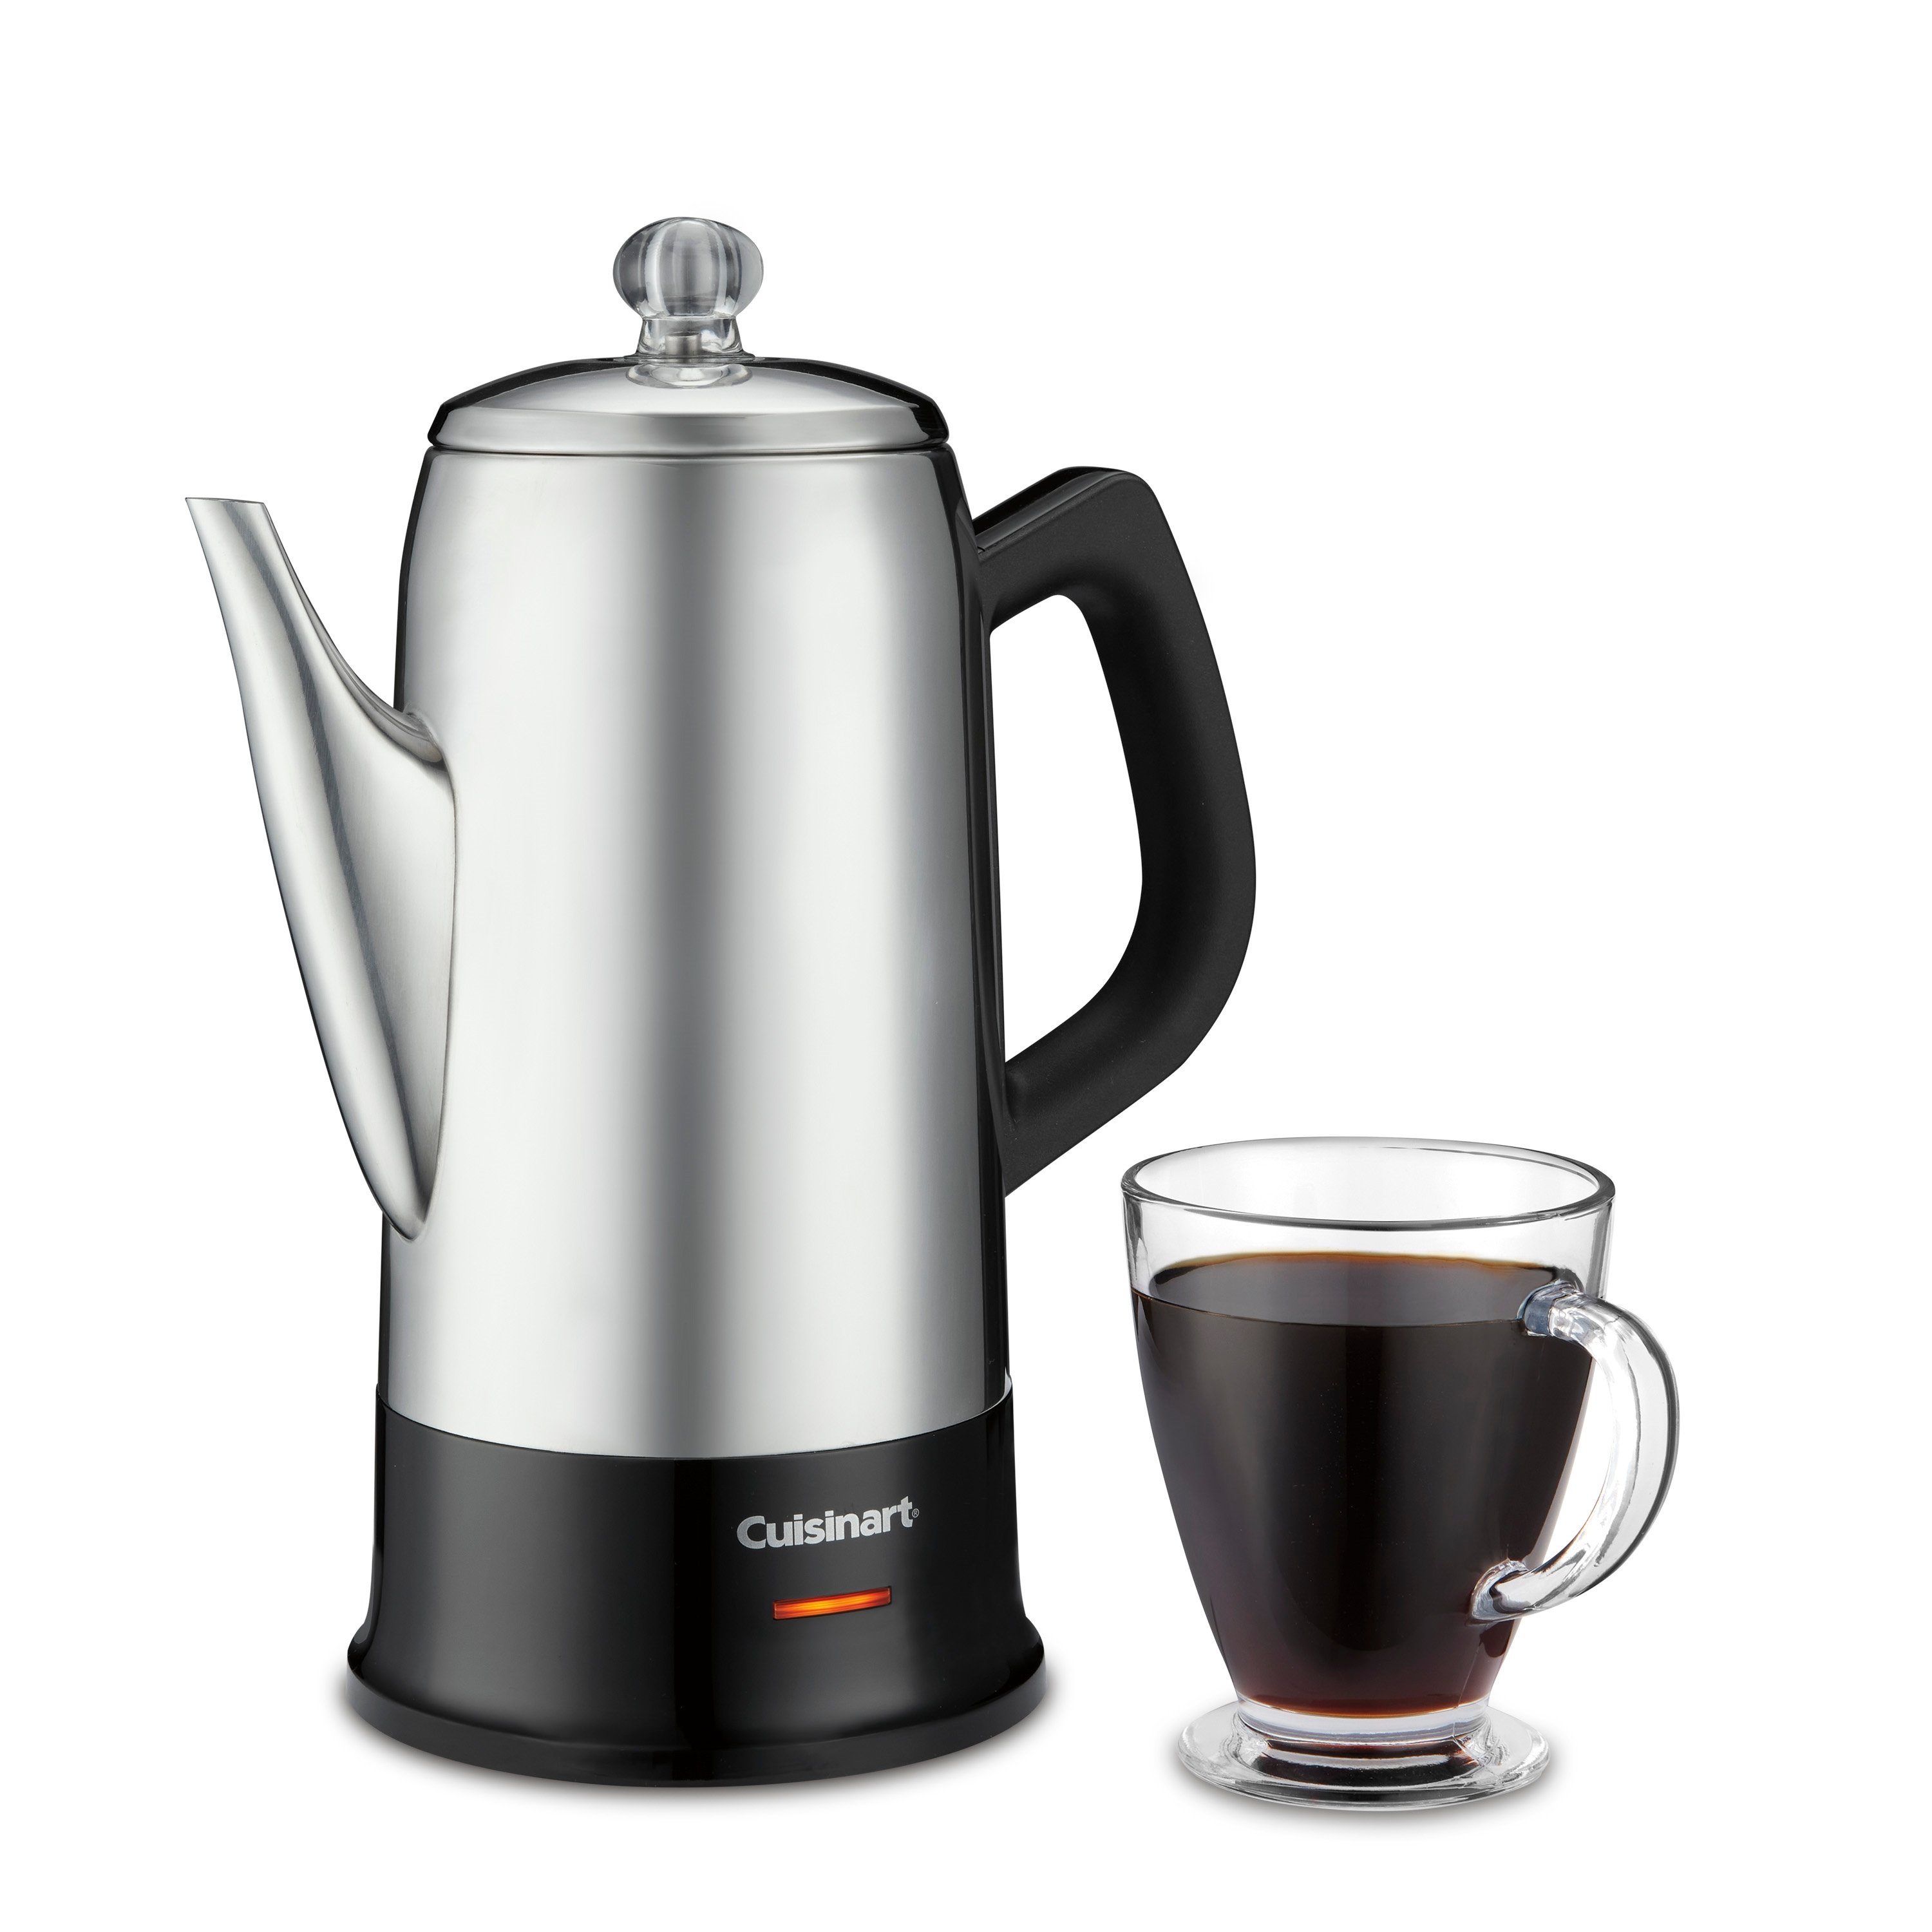 Cuisinart Classic 12-Cup Stainless Steel Residential Percolator in